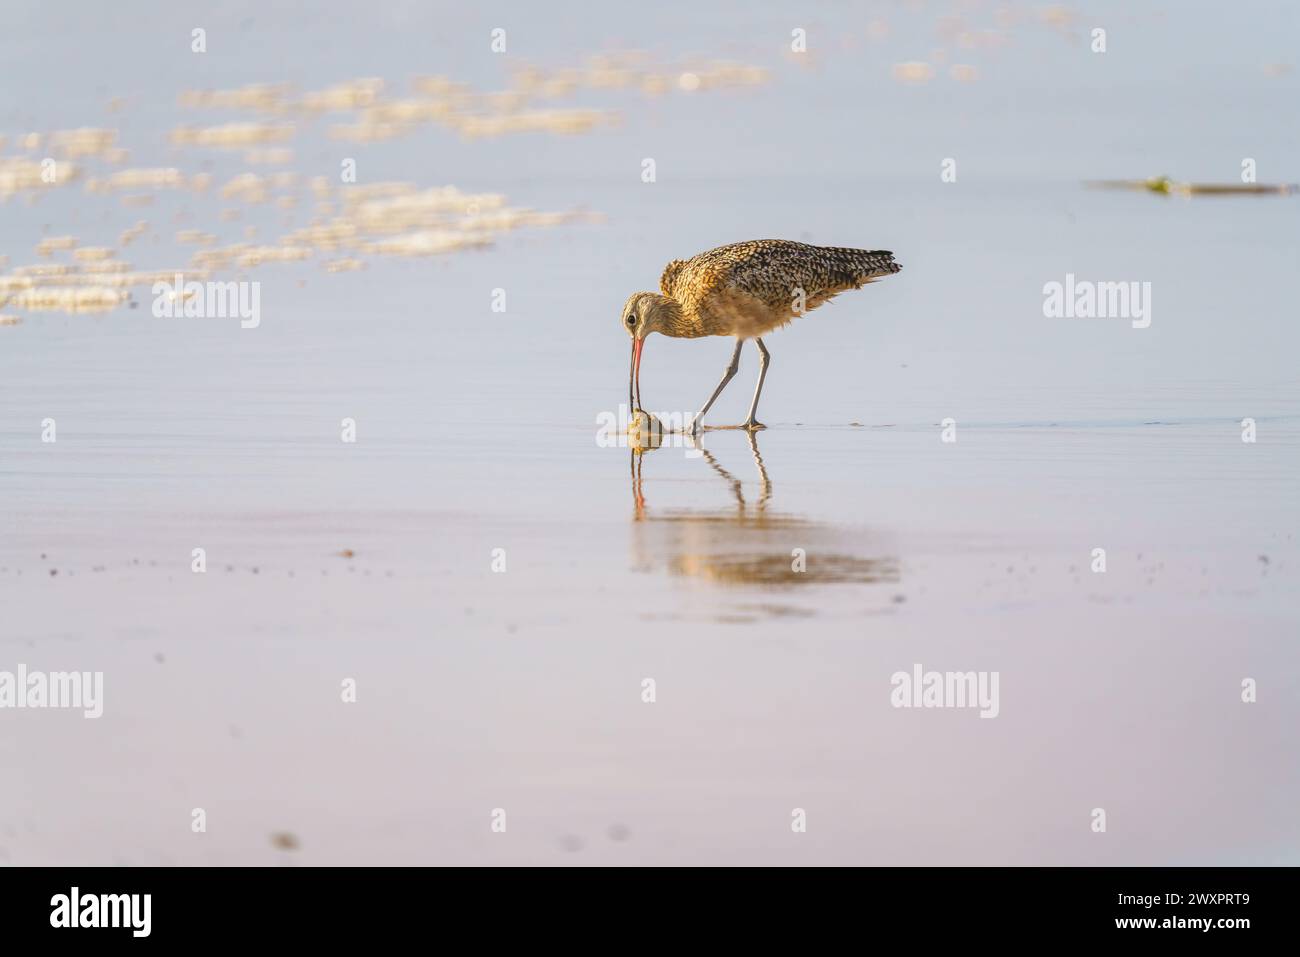 The marbled godwit, a large shorebird, on the beach at sunset, beautiful blue ocean in the background, California coastline Stock Photo